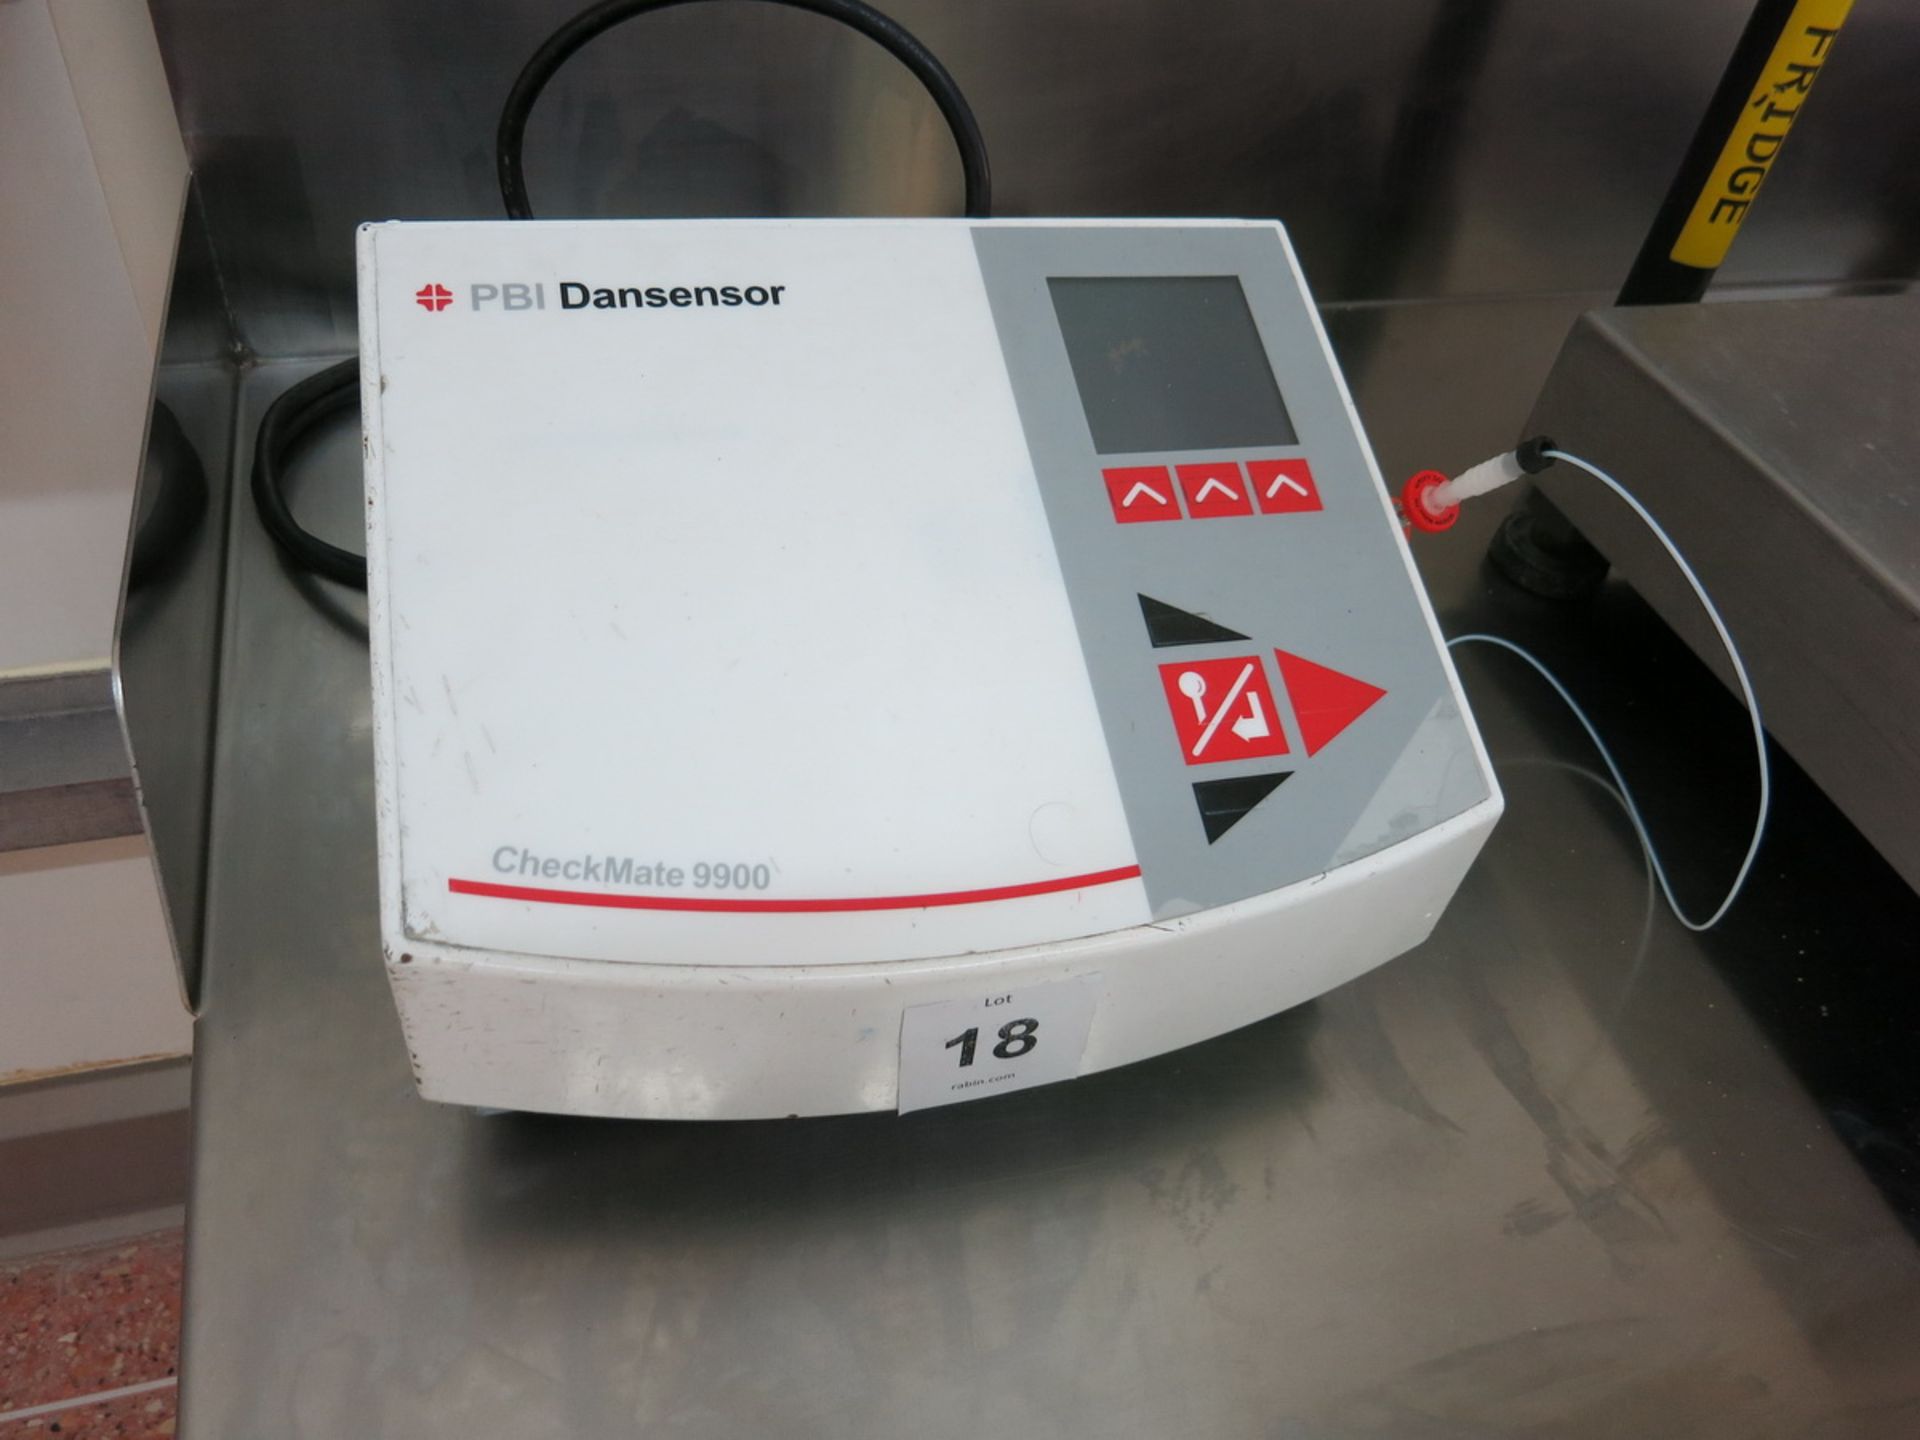 PBI-Dansen tester, model Checkmate 9900, s/n 46990392
LIFT OUT CHARGE £10